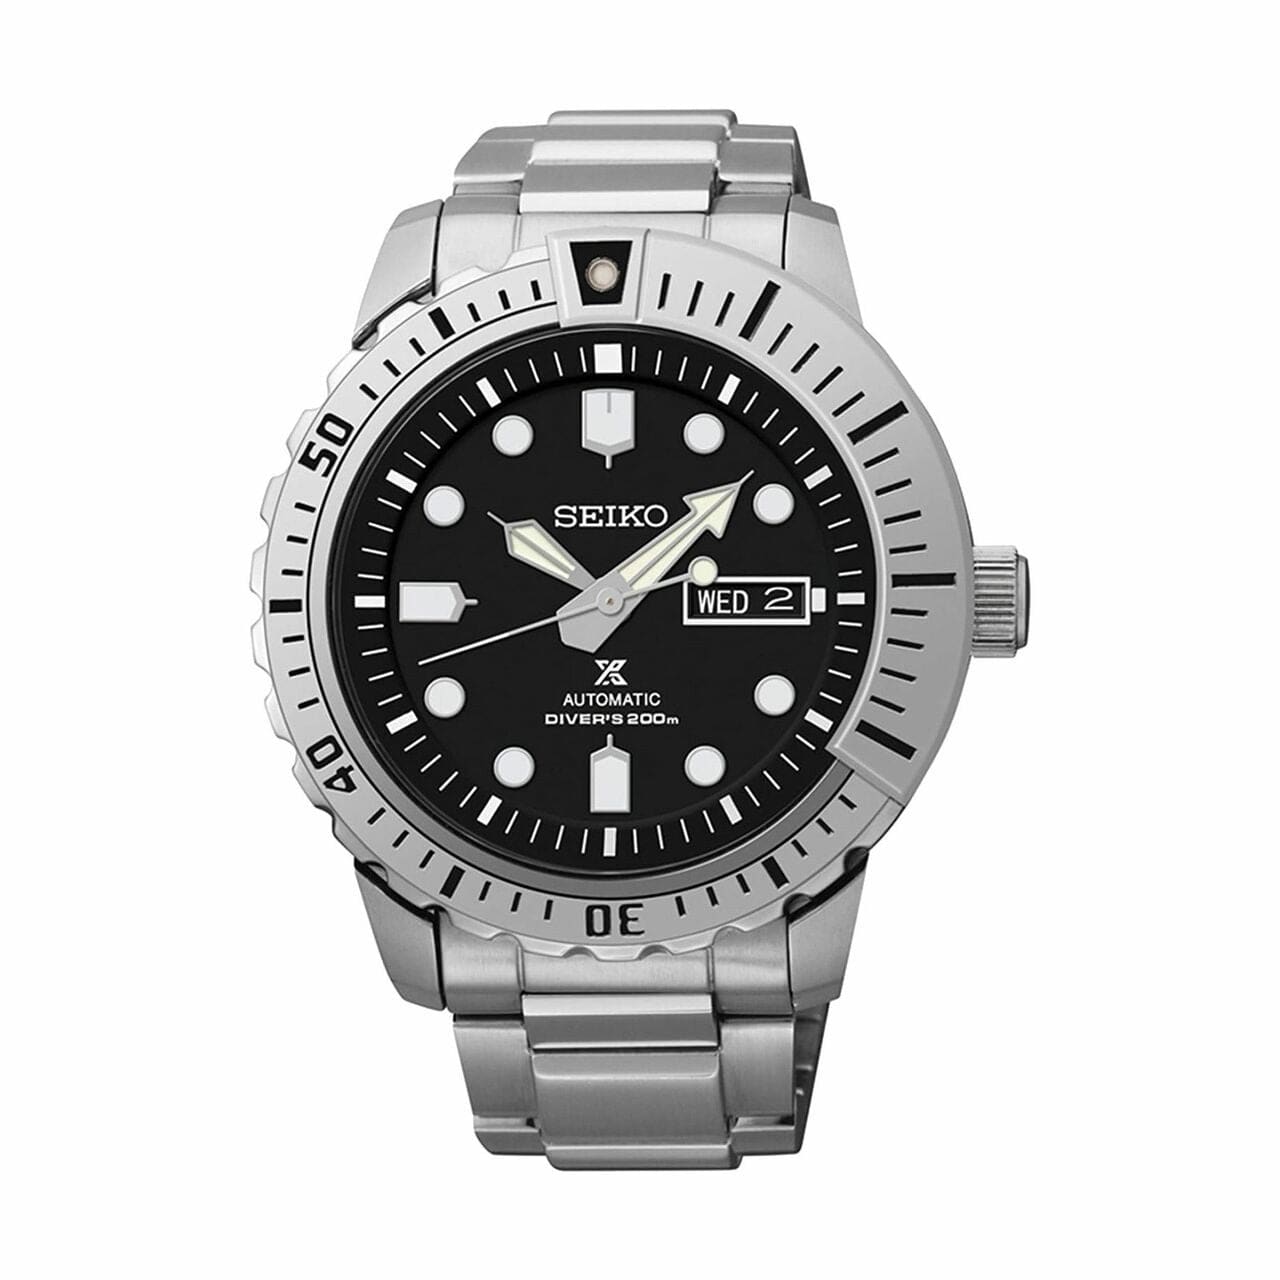 Seiko SRP585 Prospex Stainless Steel Black Dial Men's Automatic Air Diver's Watch 029665177988